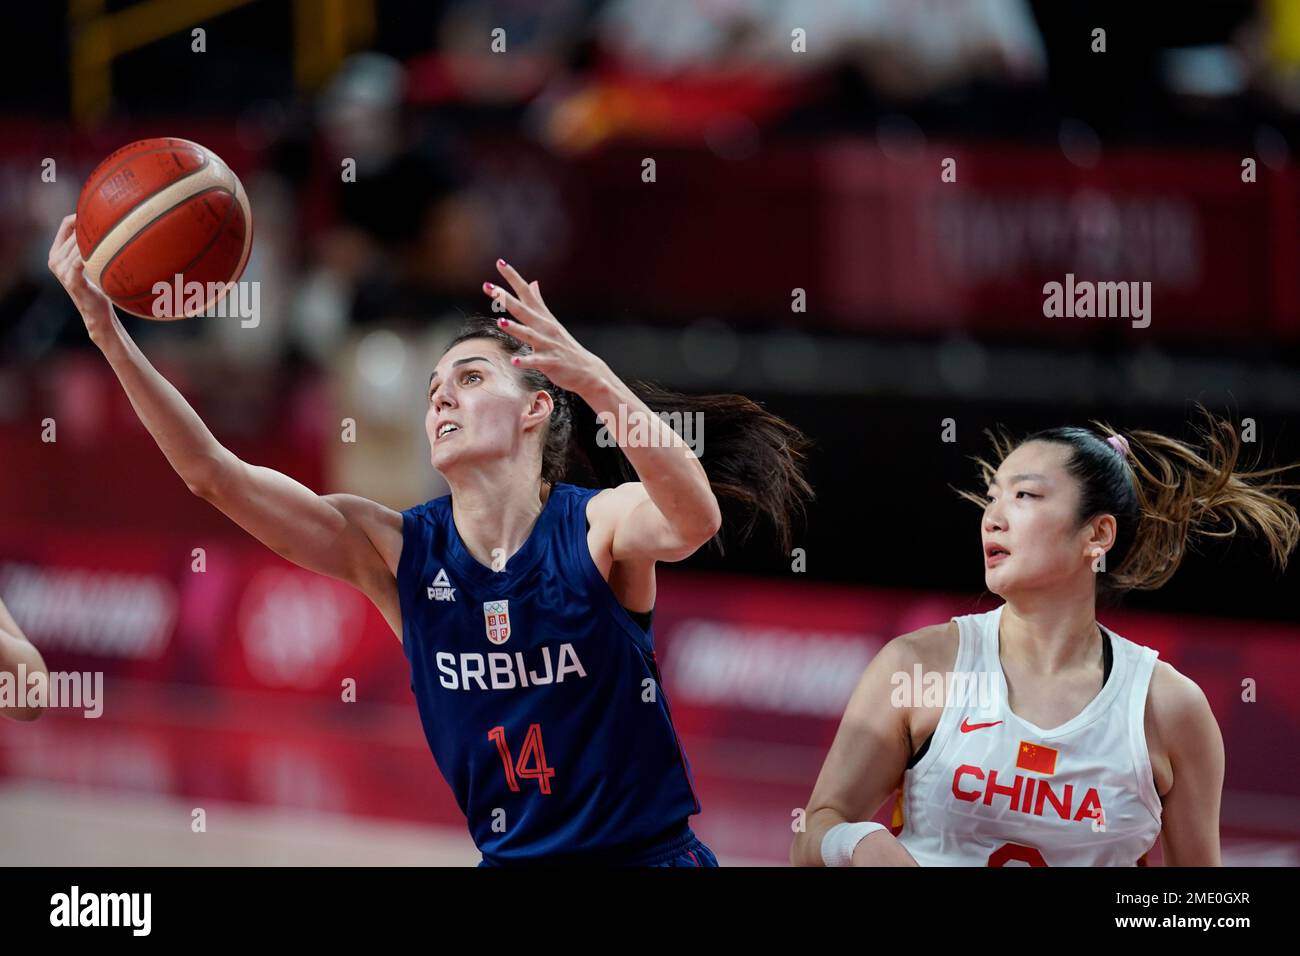 Serbia's Dragana Stankovic (14) drives to the basket ahead of China's Meng  Li, right, during a women's basketball quarterfinal round game at the 2020  Summer Olympics, Wednesday, Aug. 4, 2021, in Saitama,